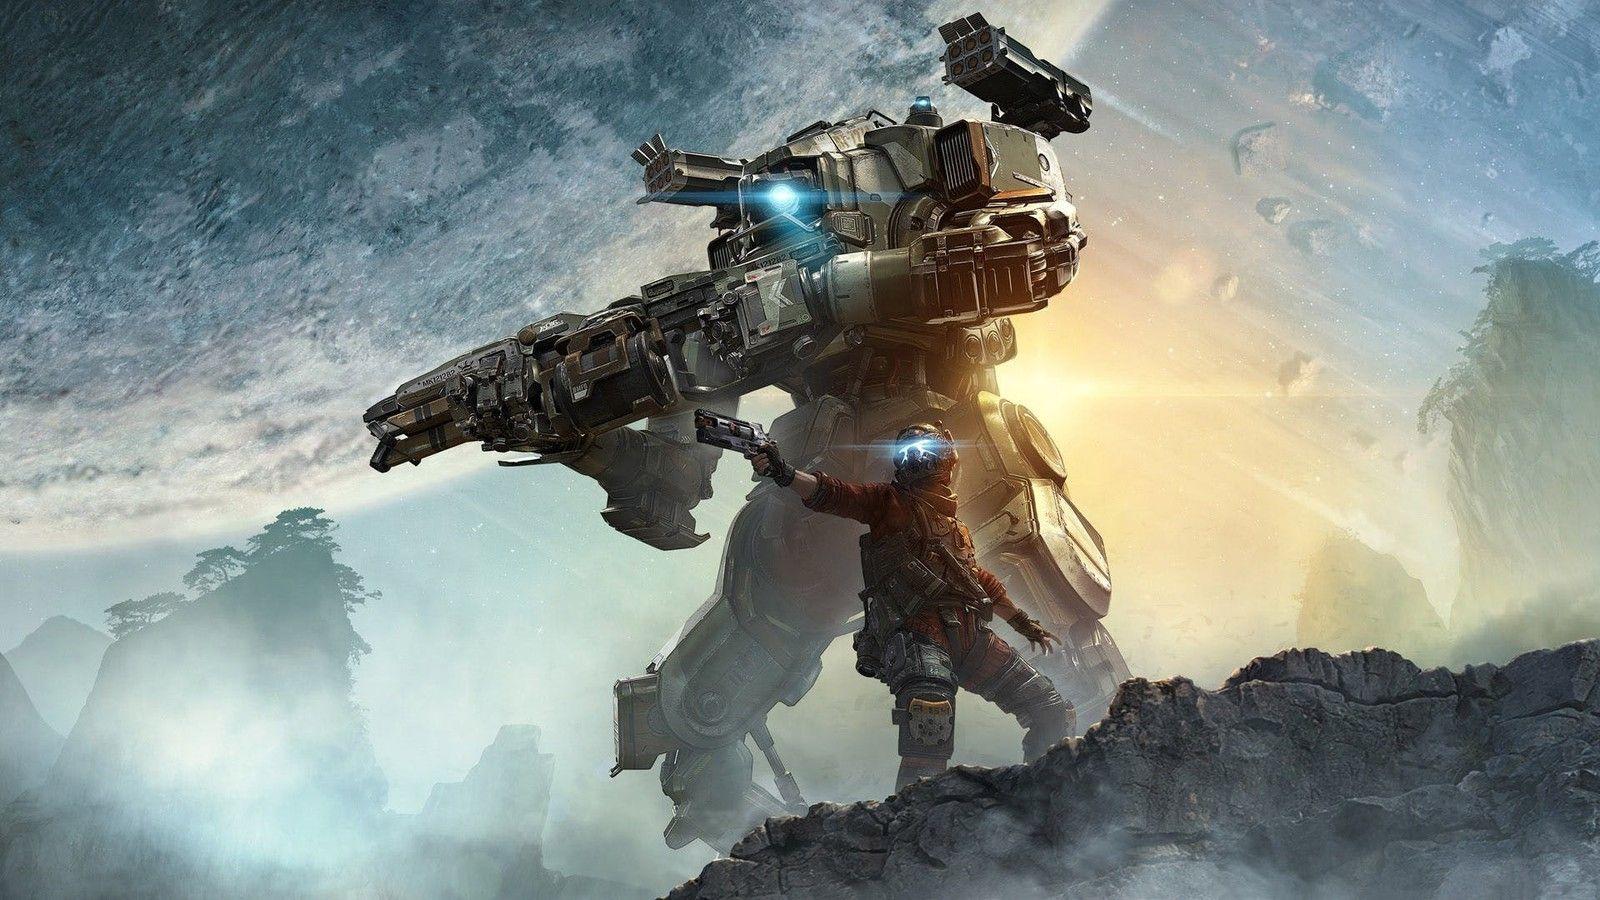 Titanfall 3 And Star Wars: Jedi Fallen Order To Release This Year